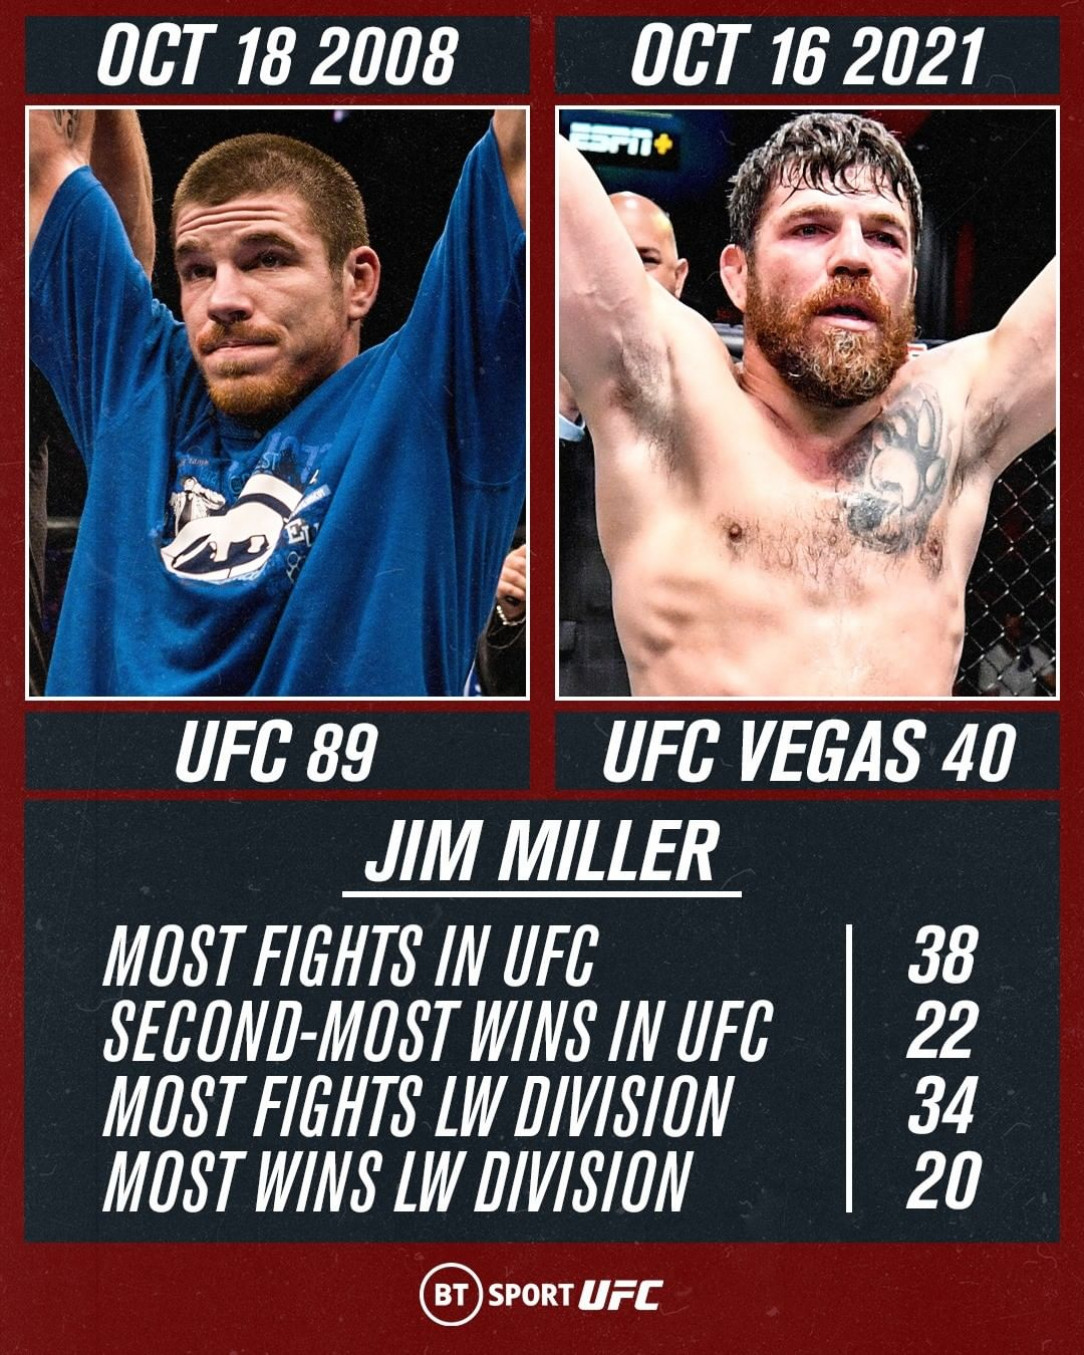 UFC records held by Jim Miller